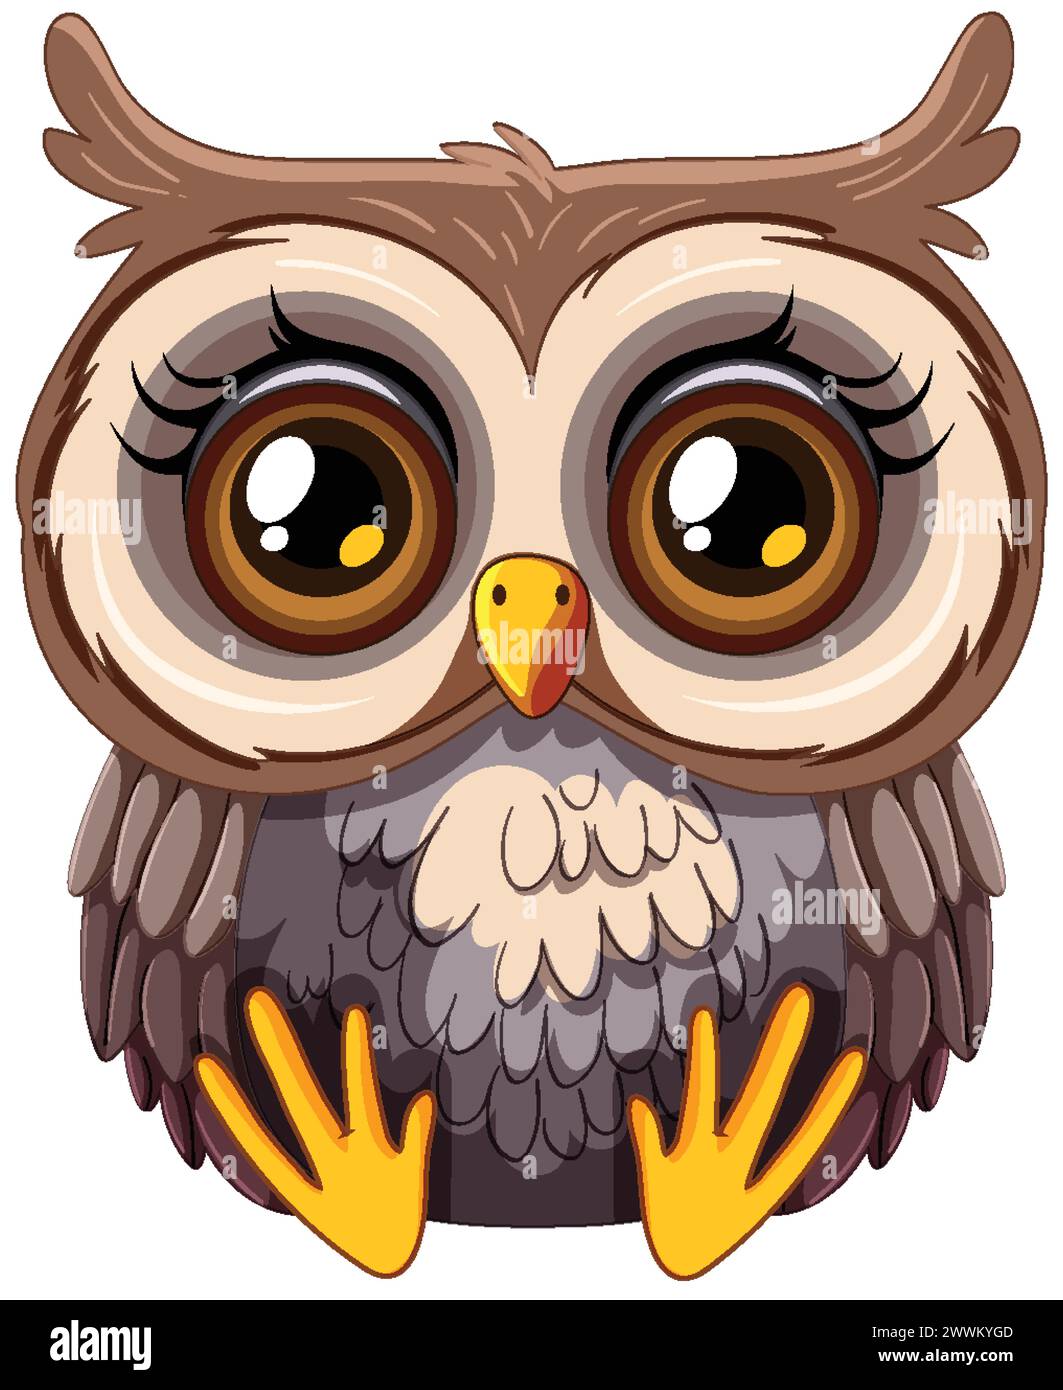 Cute, wide-eyed owl with vibrant colors Stock Vector